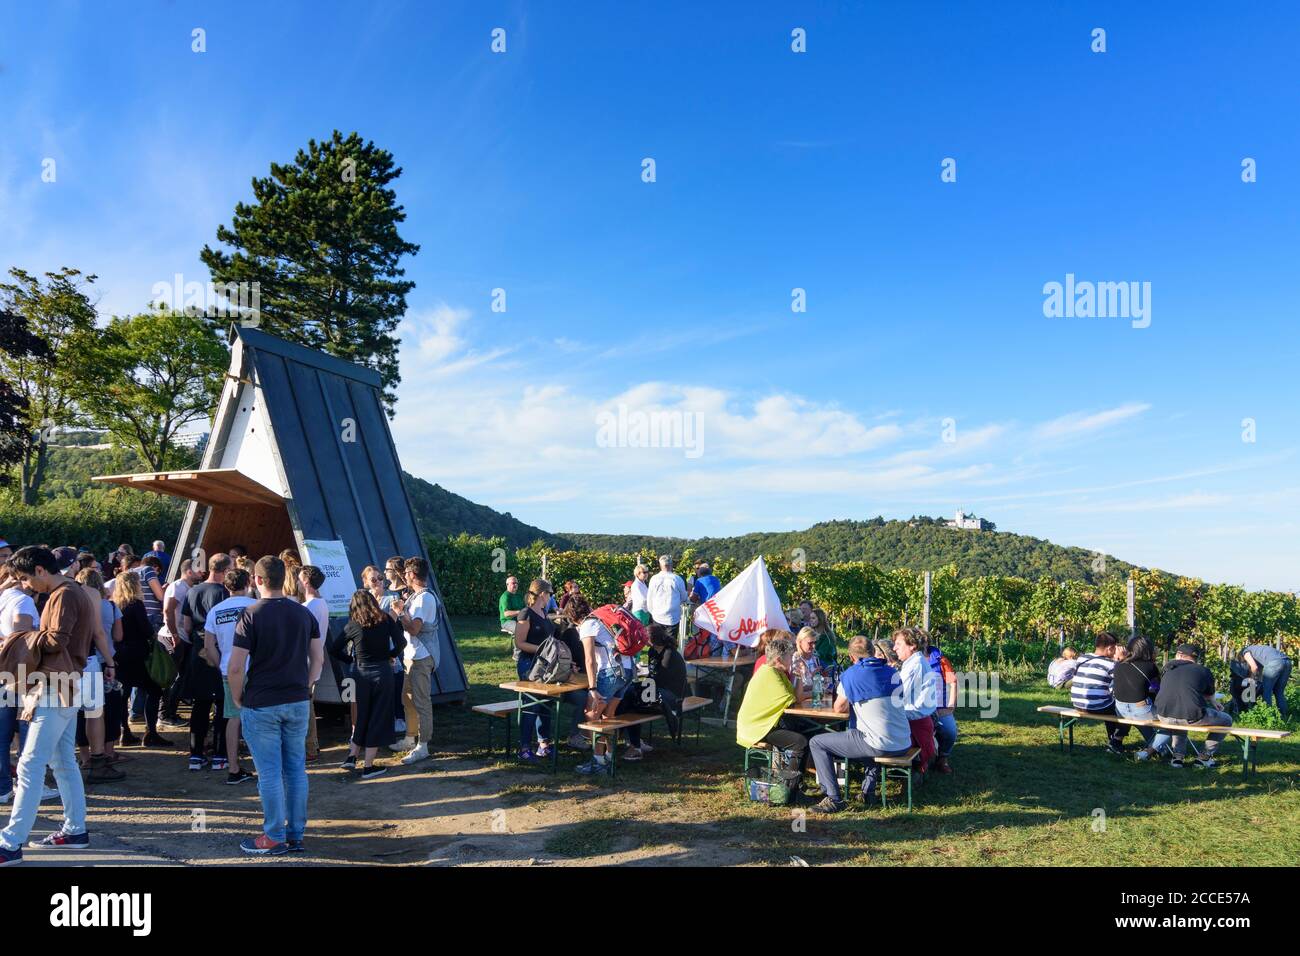 Vienna, people at Weinwandertag (wine hiking day) Wien, vineyard, wine refreshment station, view to church at mountain Leopoldsberg in 19. Döbling, Wi Stock Photo